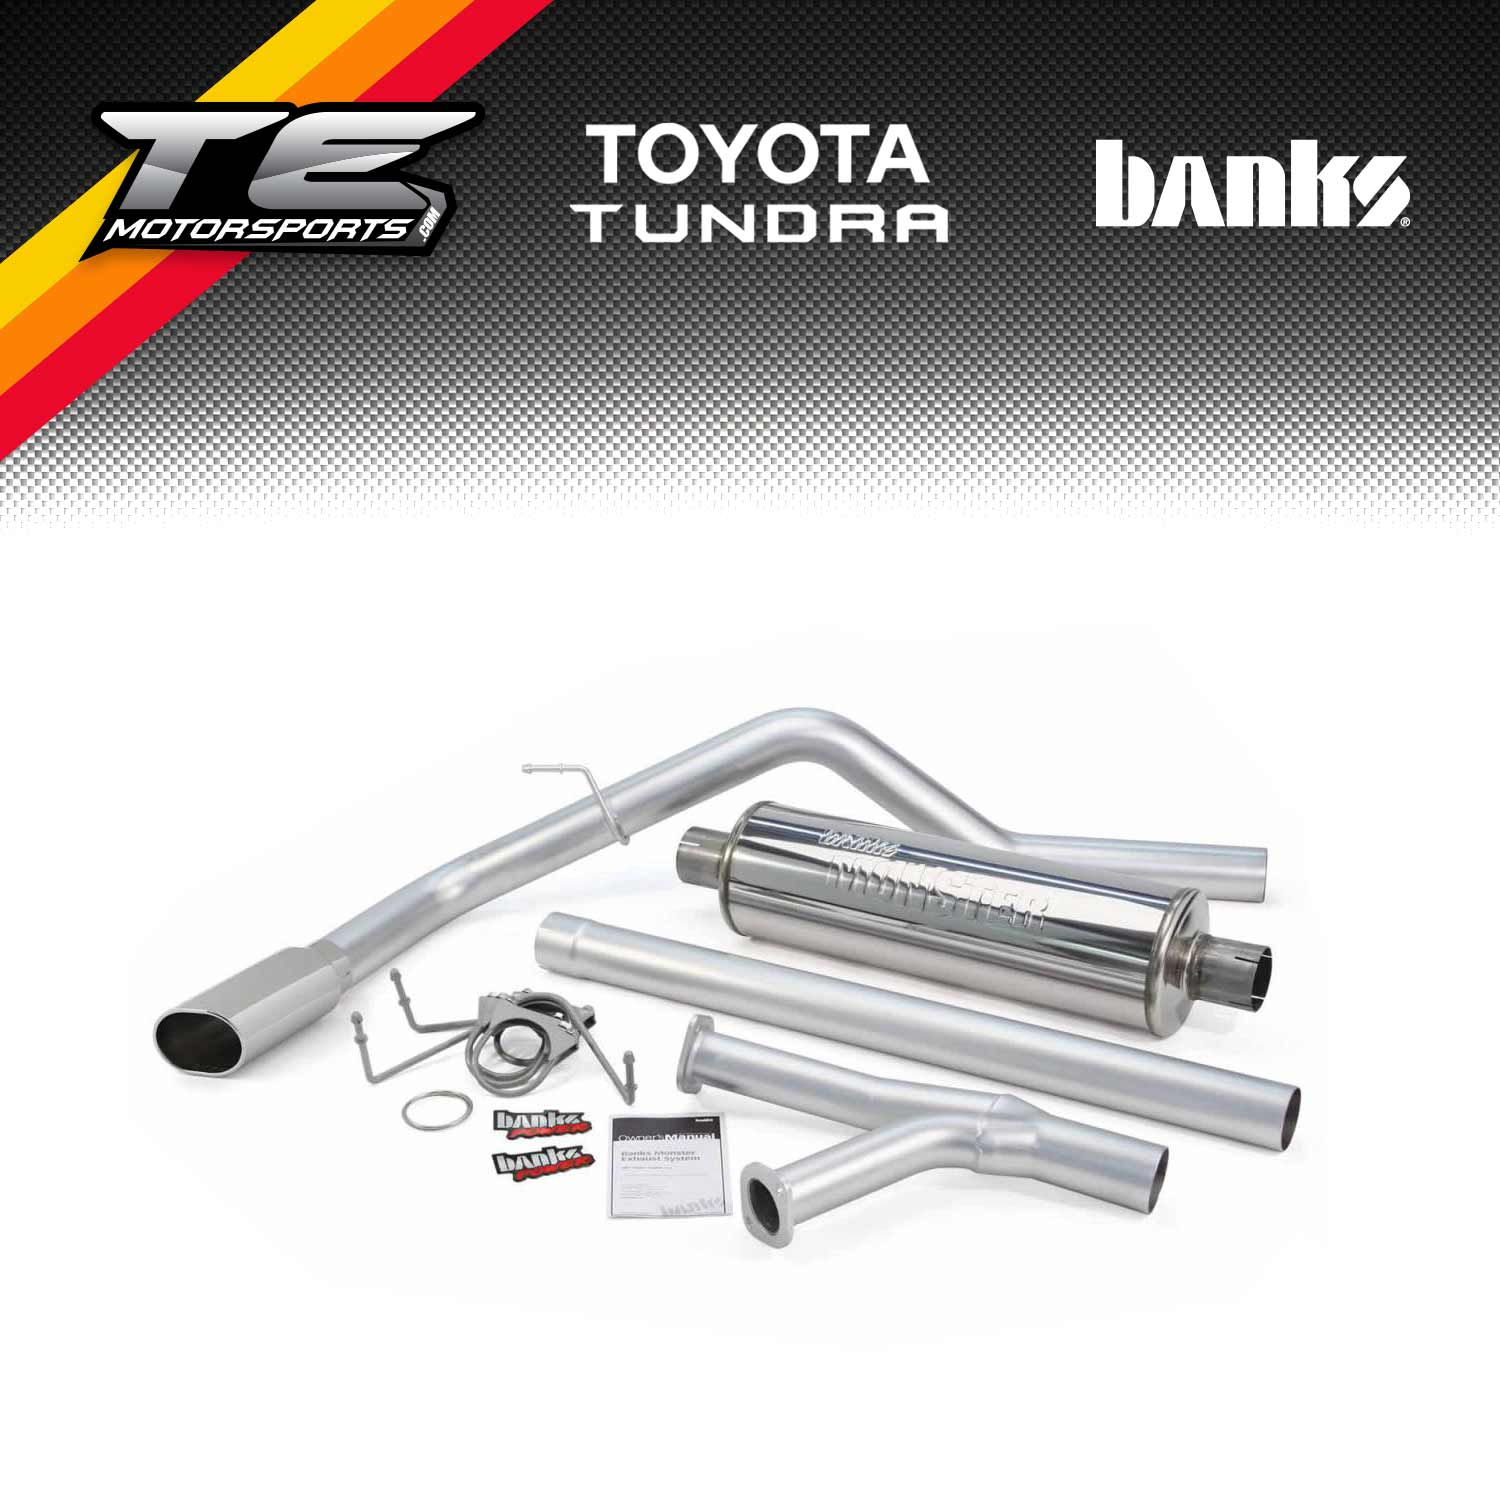 Banks Monster Exhaust System, 3-inch Single Exit, Chrome Tip for 2009-2019 Toyota Tundra 4.6L/5.7L, DCMB, CMCB